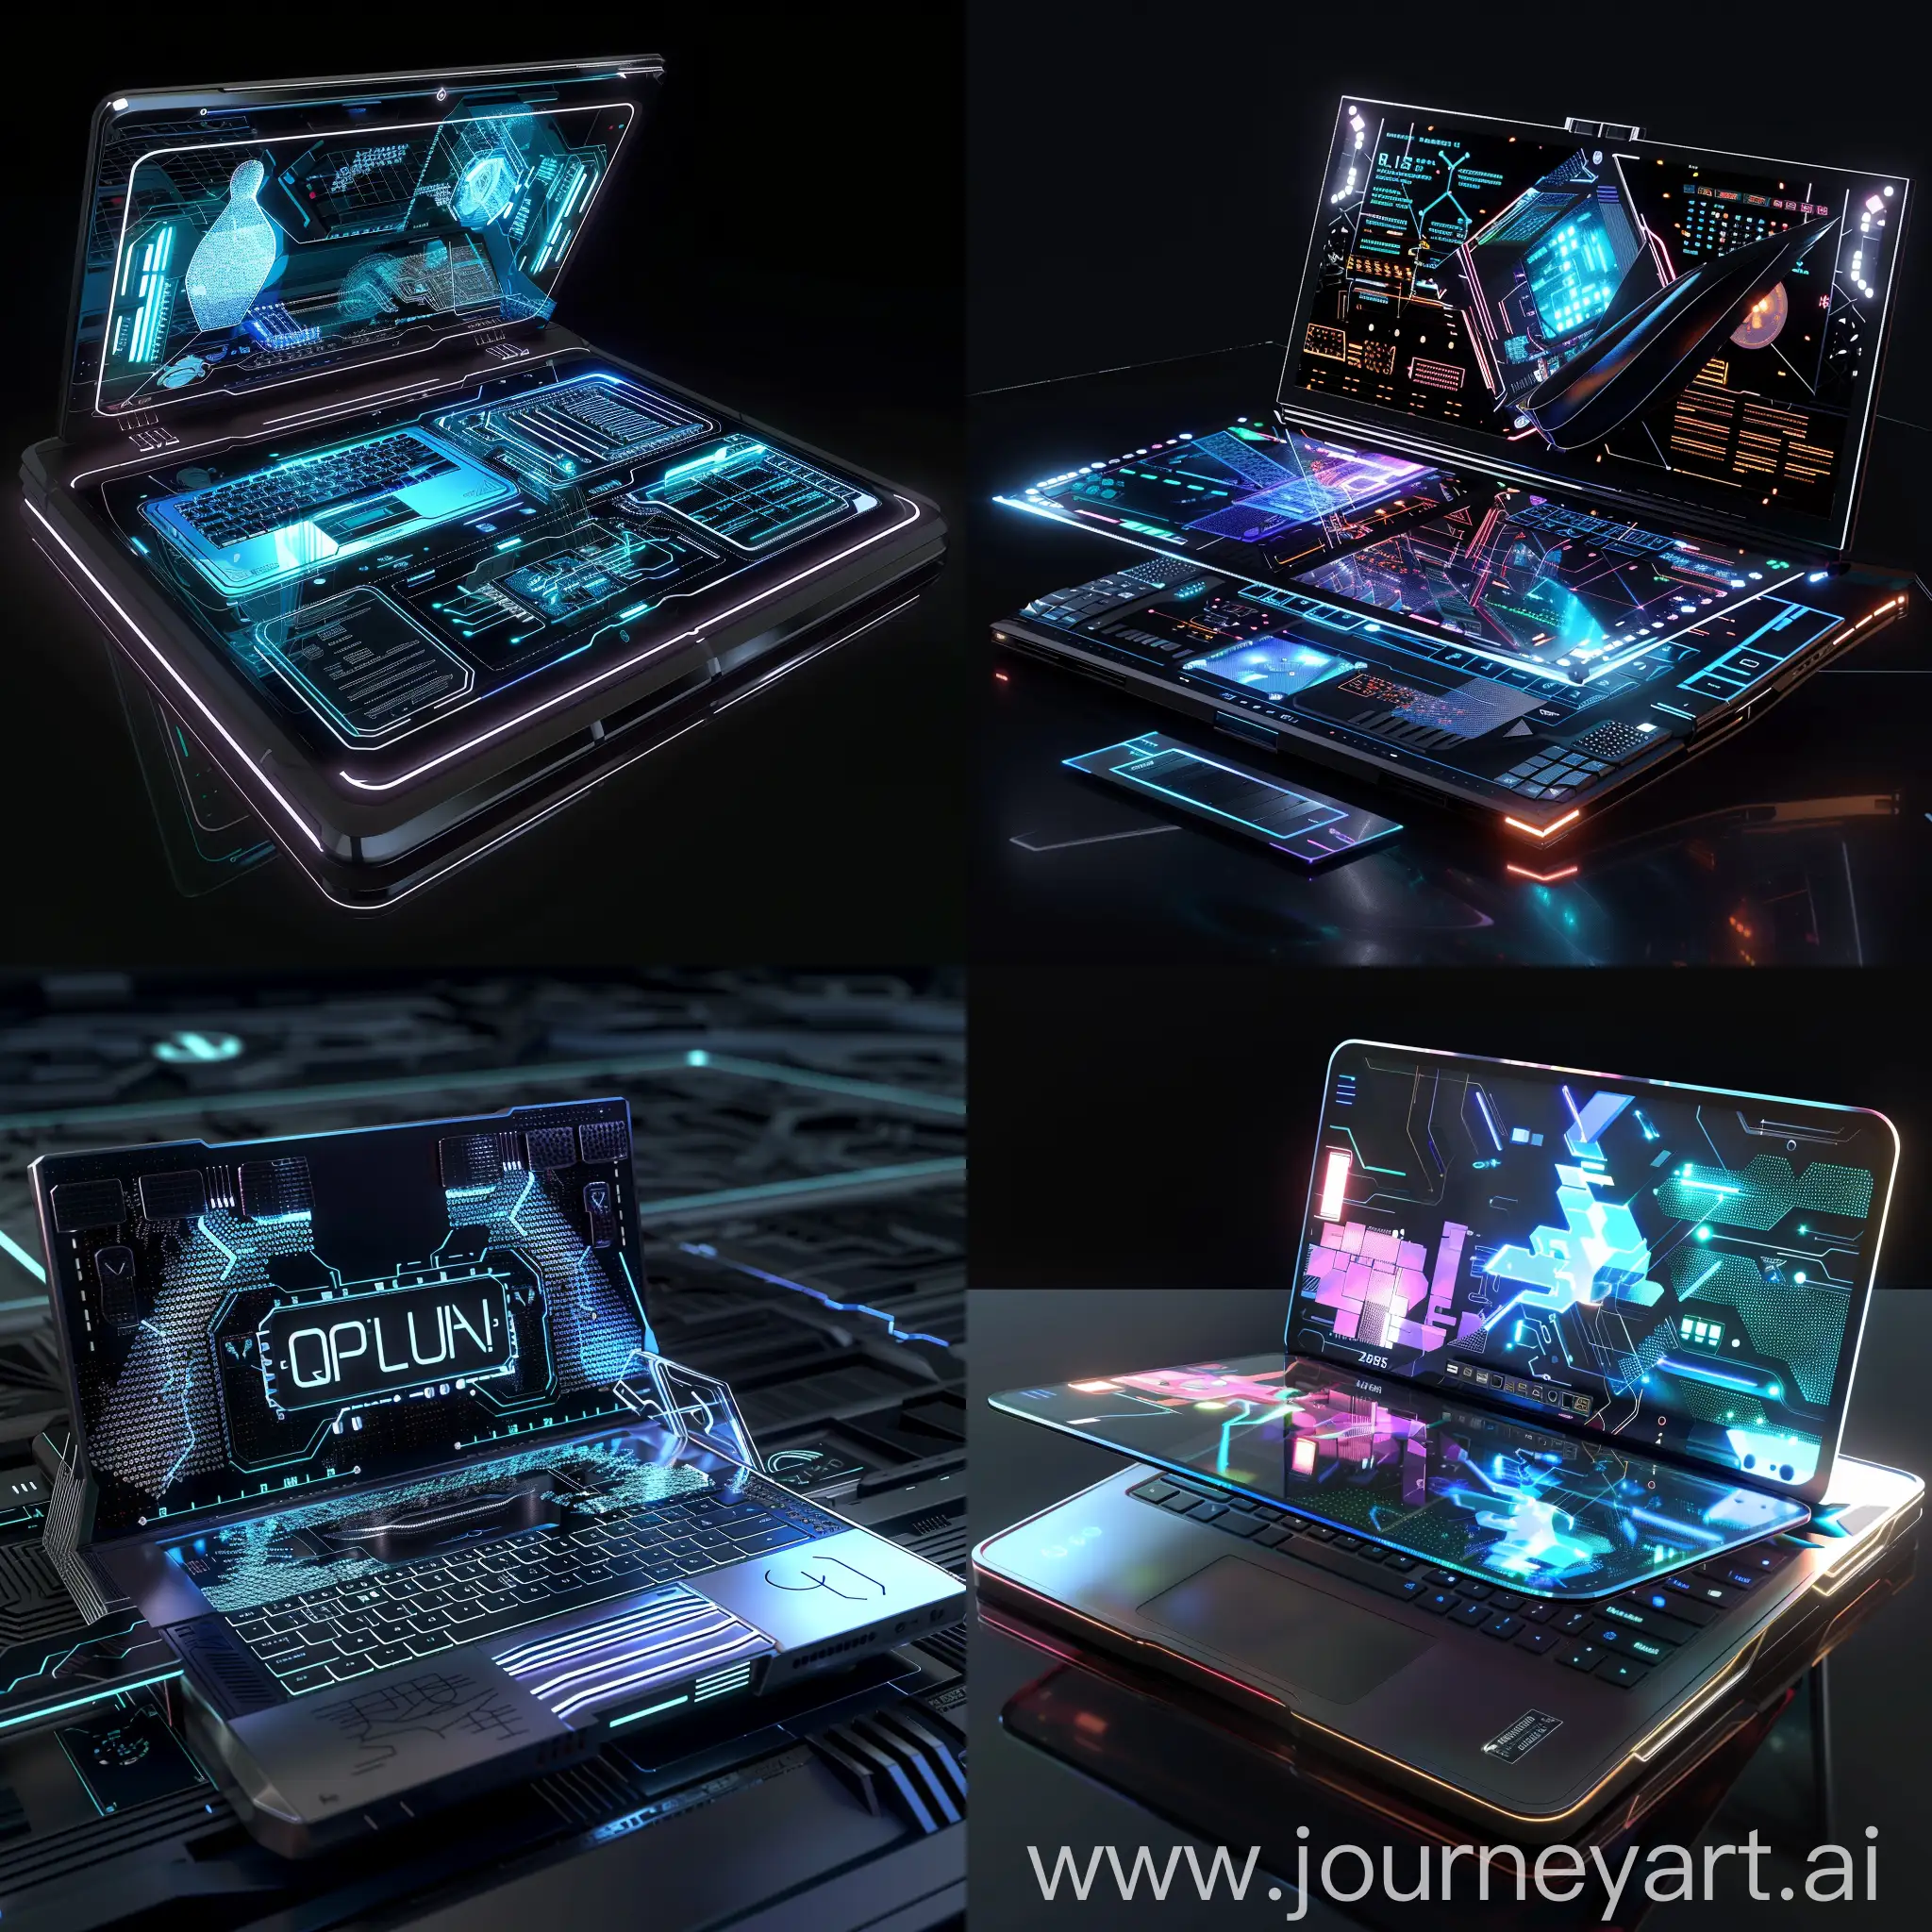 Futuristic laptop, in futuristic style, Quantum Processing Units (QPUs), Graphene-based Transistors, 3D Chip Stacking, Optical Data Transfer, Neuromorphic Computing, Solid-State Batteries, Integrated Photovoltaic Cells, Flexible and Foldable Components, Advanced Thermal Management, Integrated AI Co-processors, Flexible and Foldable Displays, Holographic Displays, Transparent Screens, Touch-sensitive and Haptic Feedback Surfaces, Modular Design, Biometric Security Features, Voice and Gesture Control, Environmental Sensing and Adaptation, Self-Healing Materials, Integrated Solar Panels, 2045, unreal engine 5 --stylize 1000